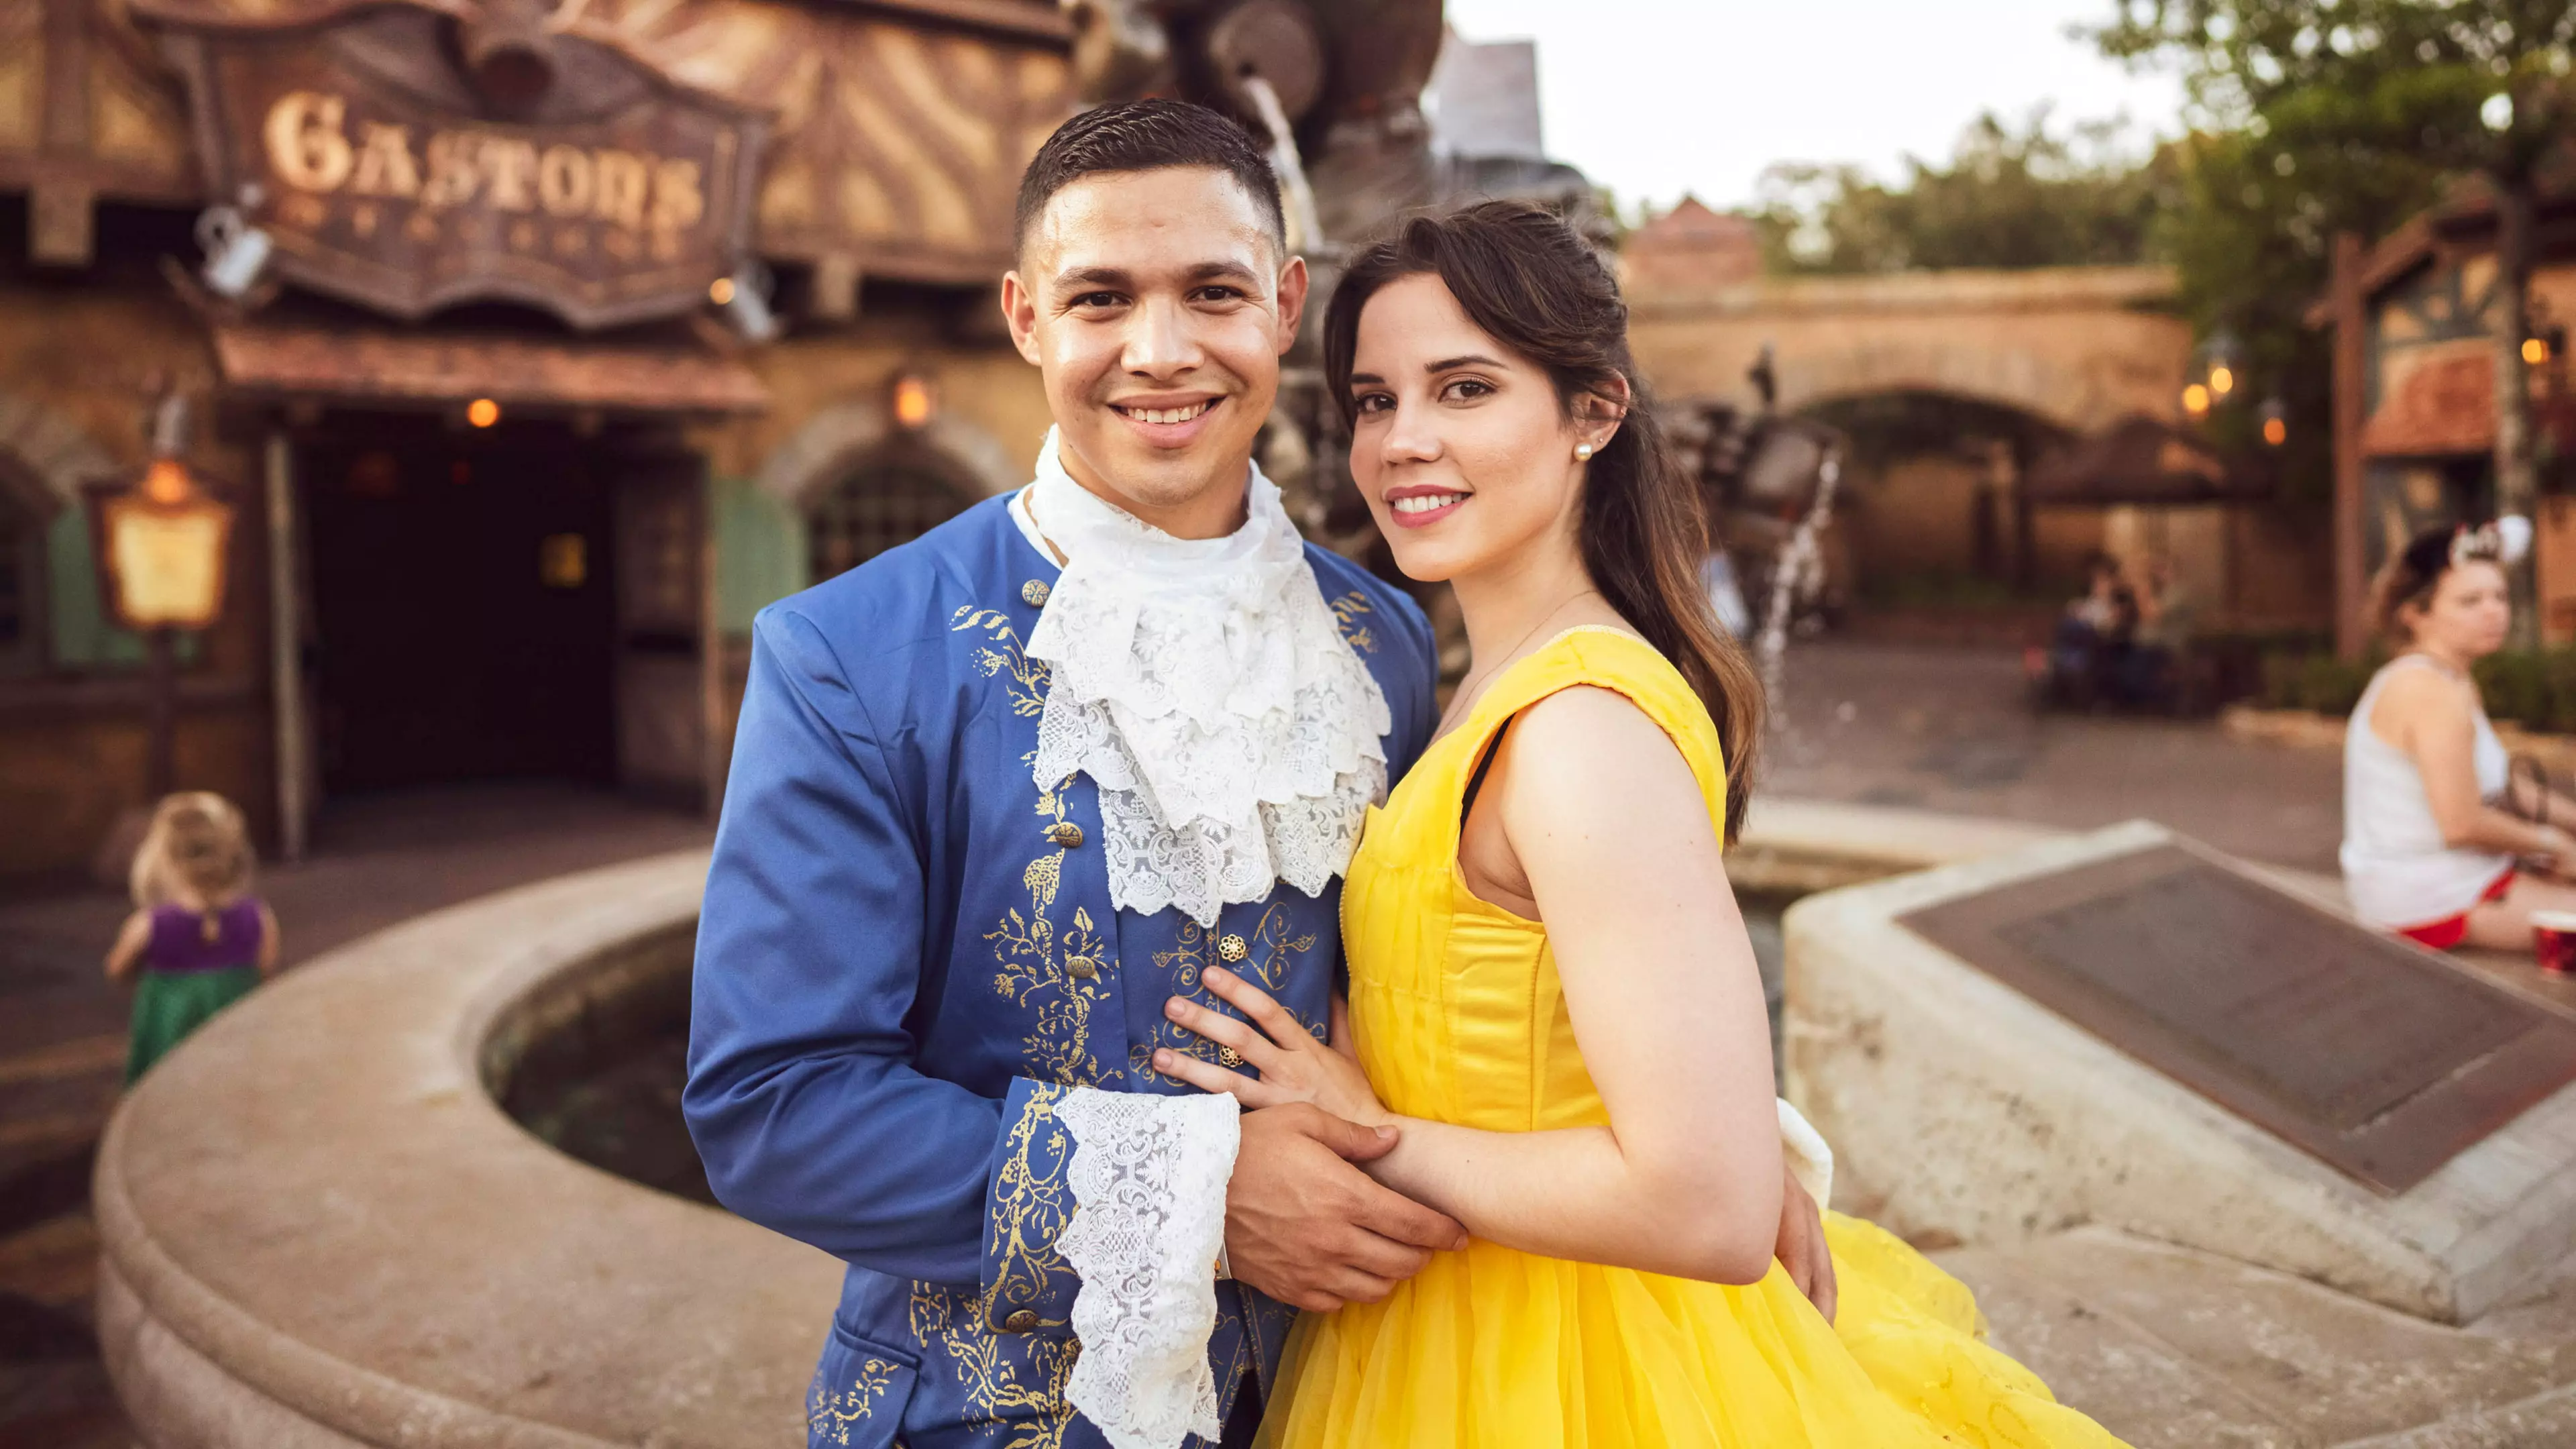 Man Stages Incredible 'Beauty And The Beast' Proposal At Disney World